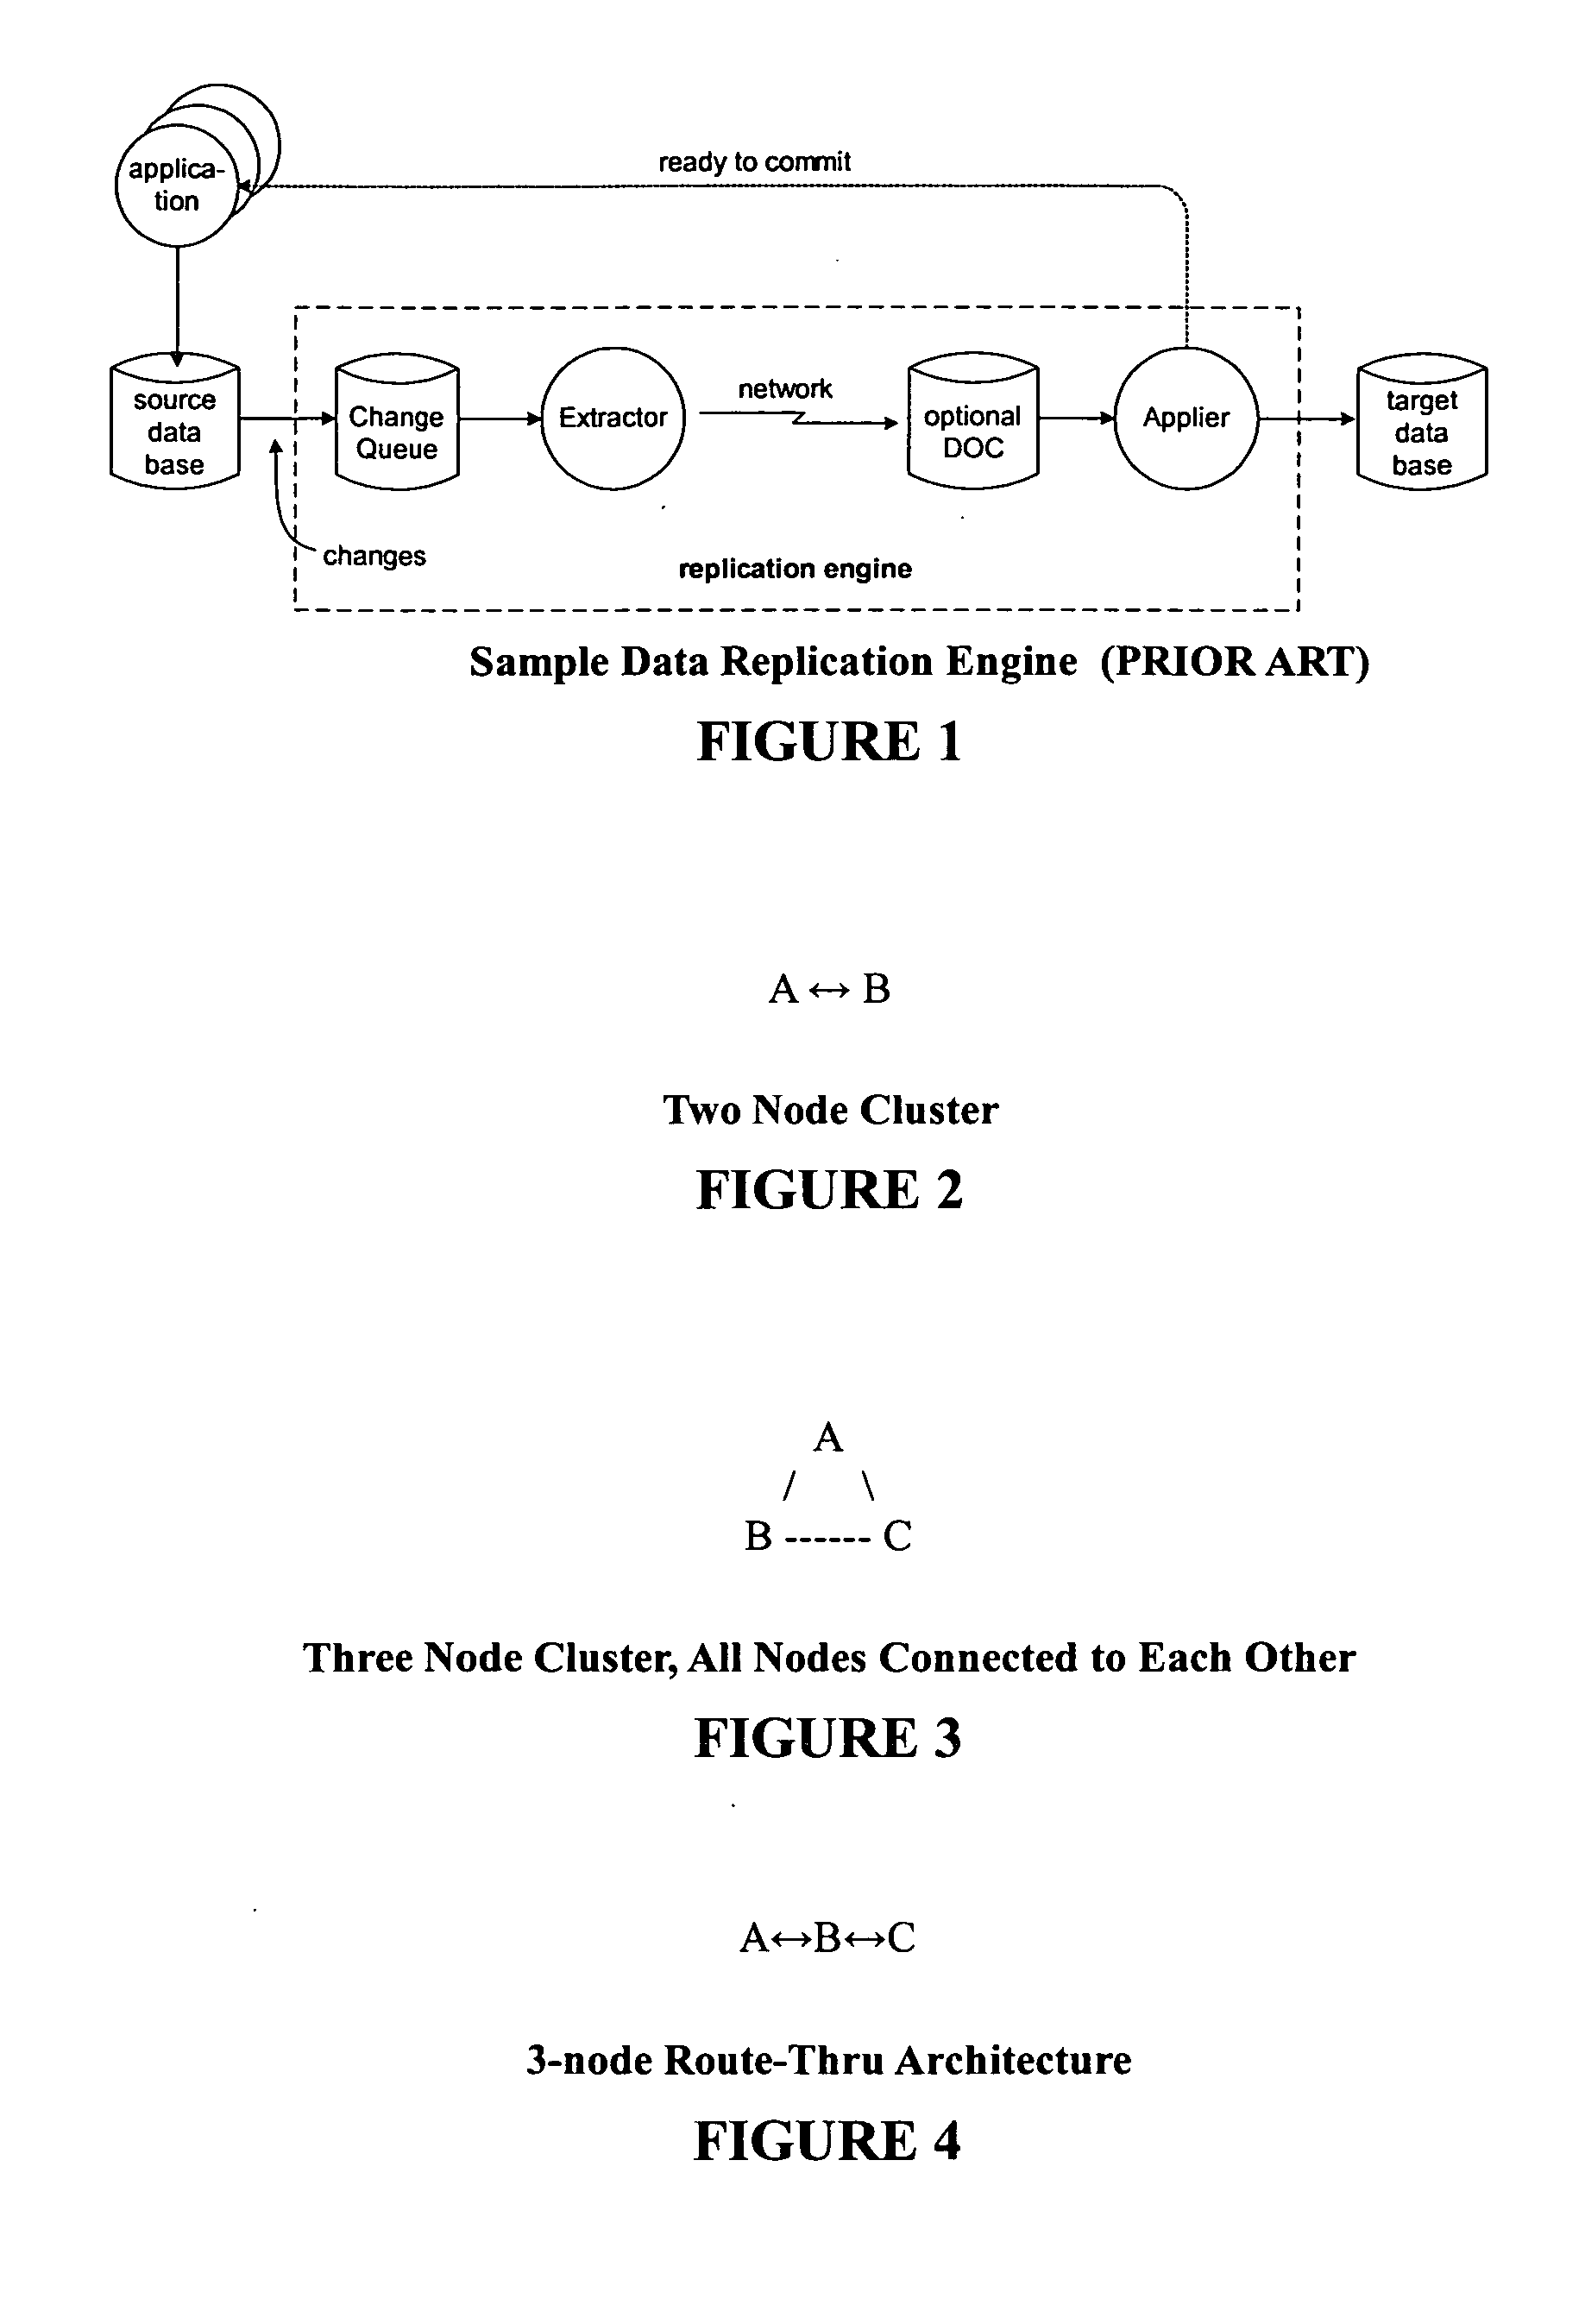 Control of a data replication engine using attributes associated with a transaction